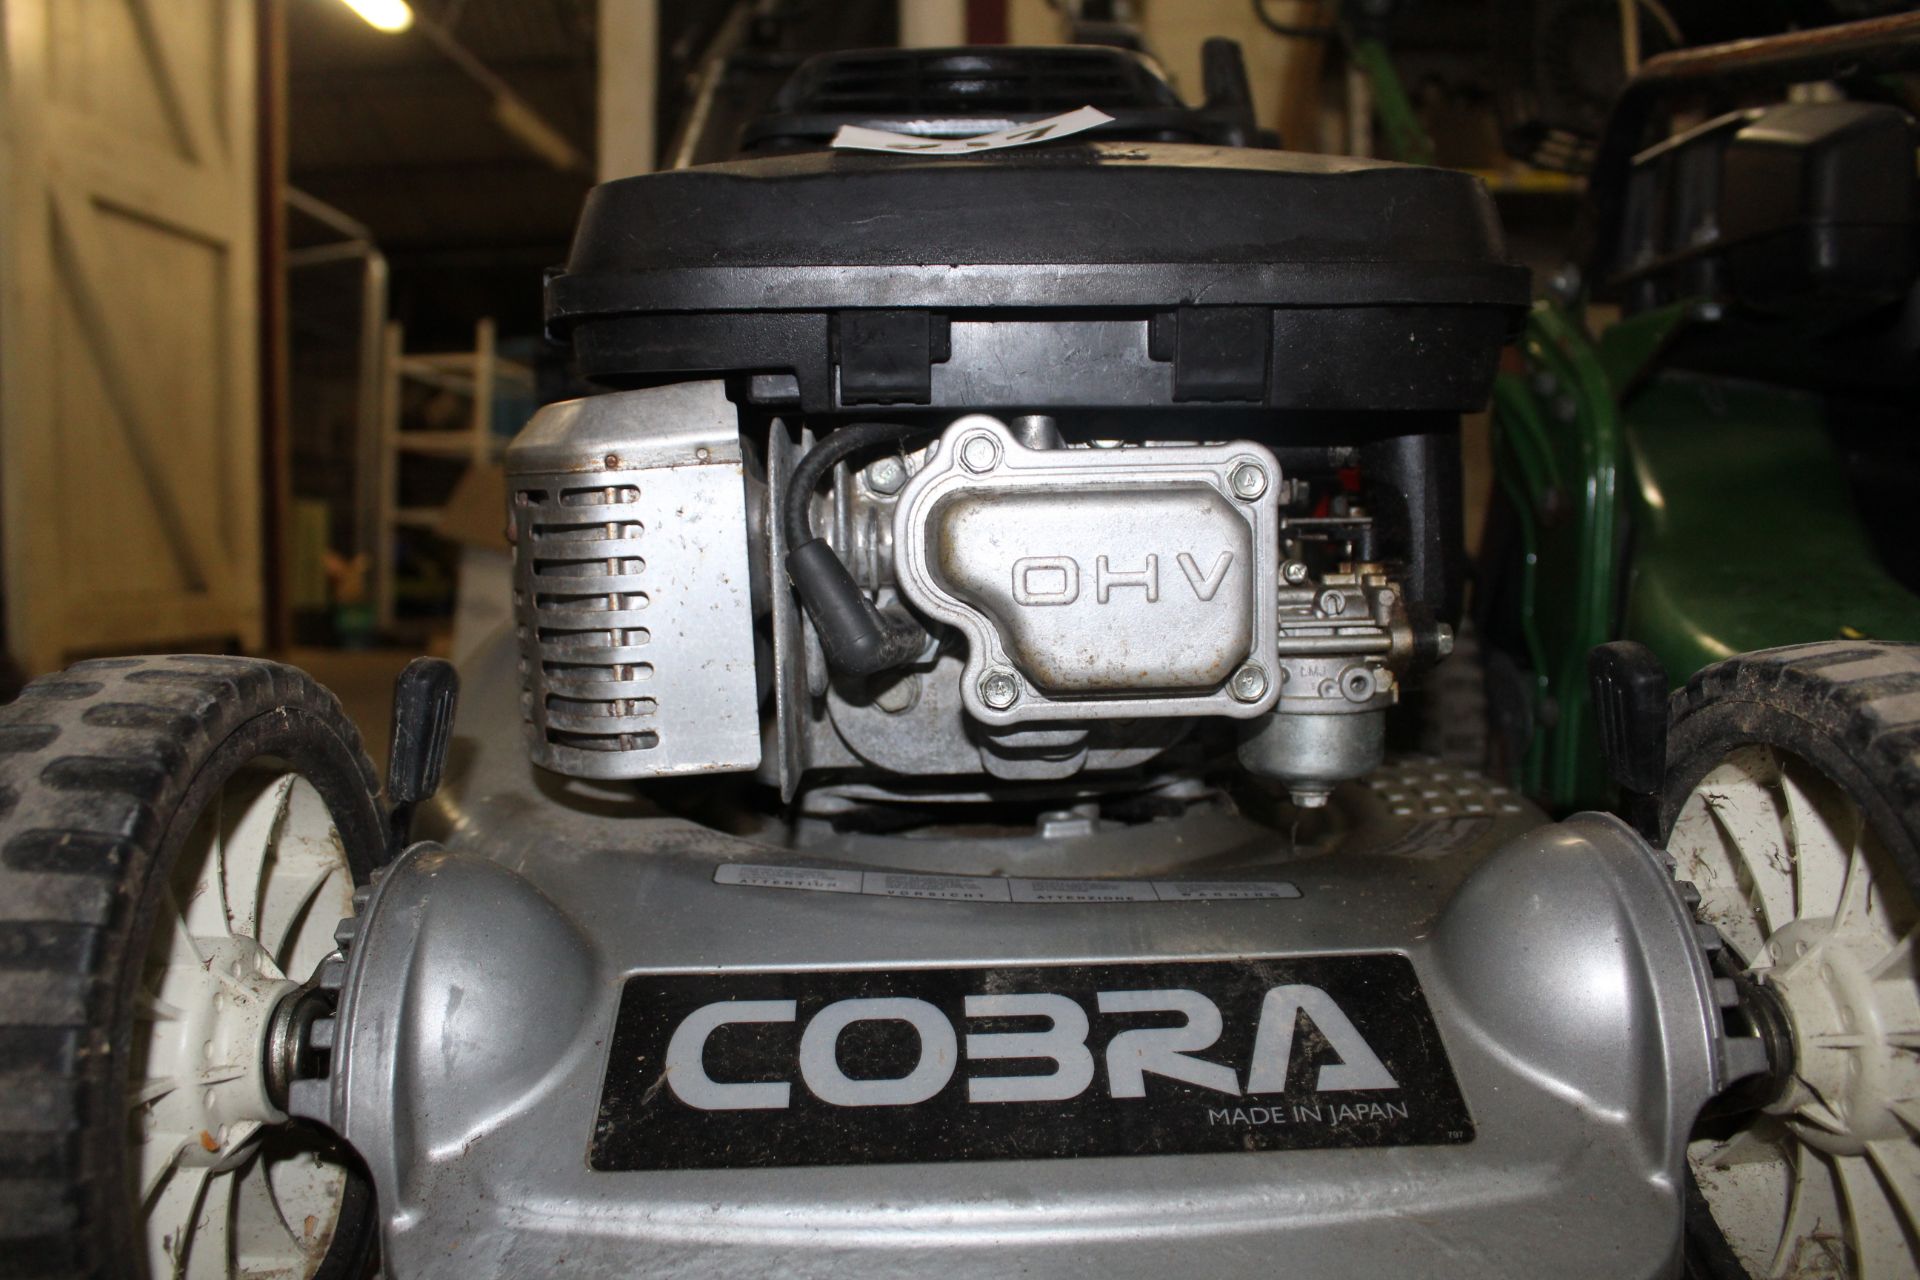 Cobra self-propelled pedestrian mower. With roller - Image 3 of 9